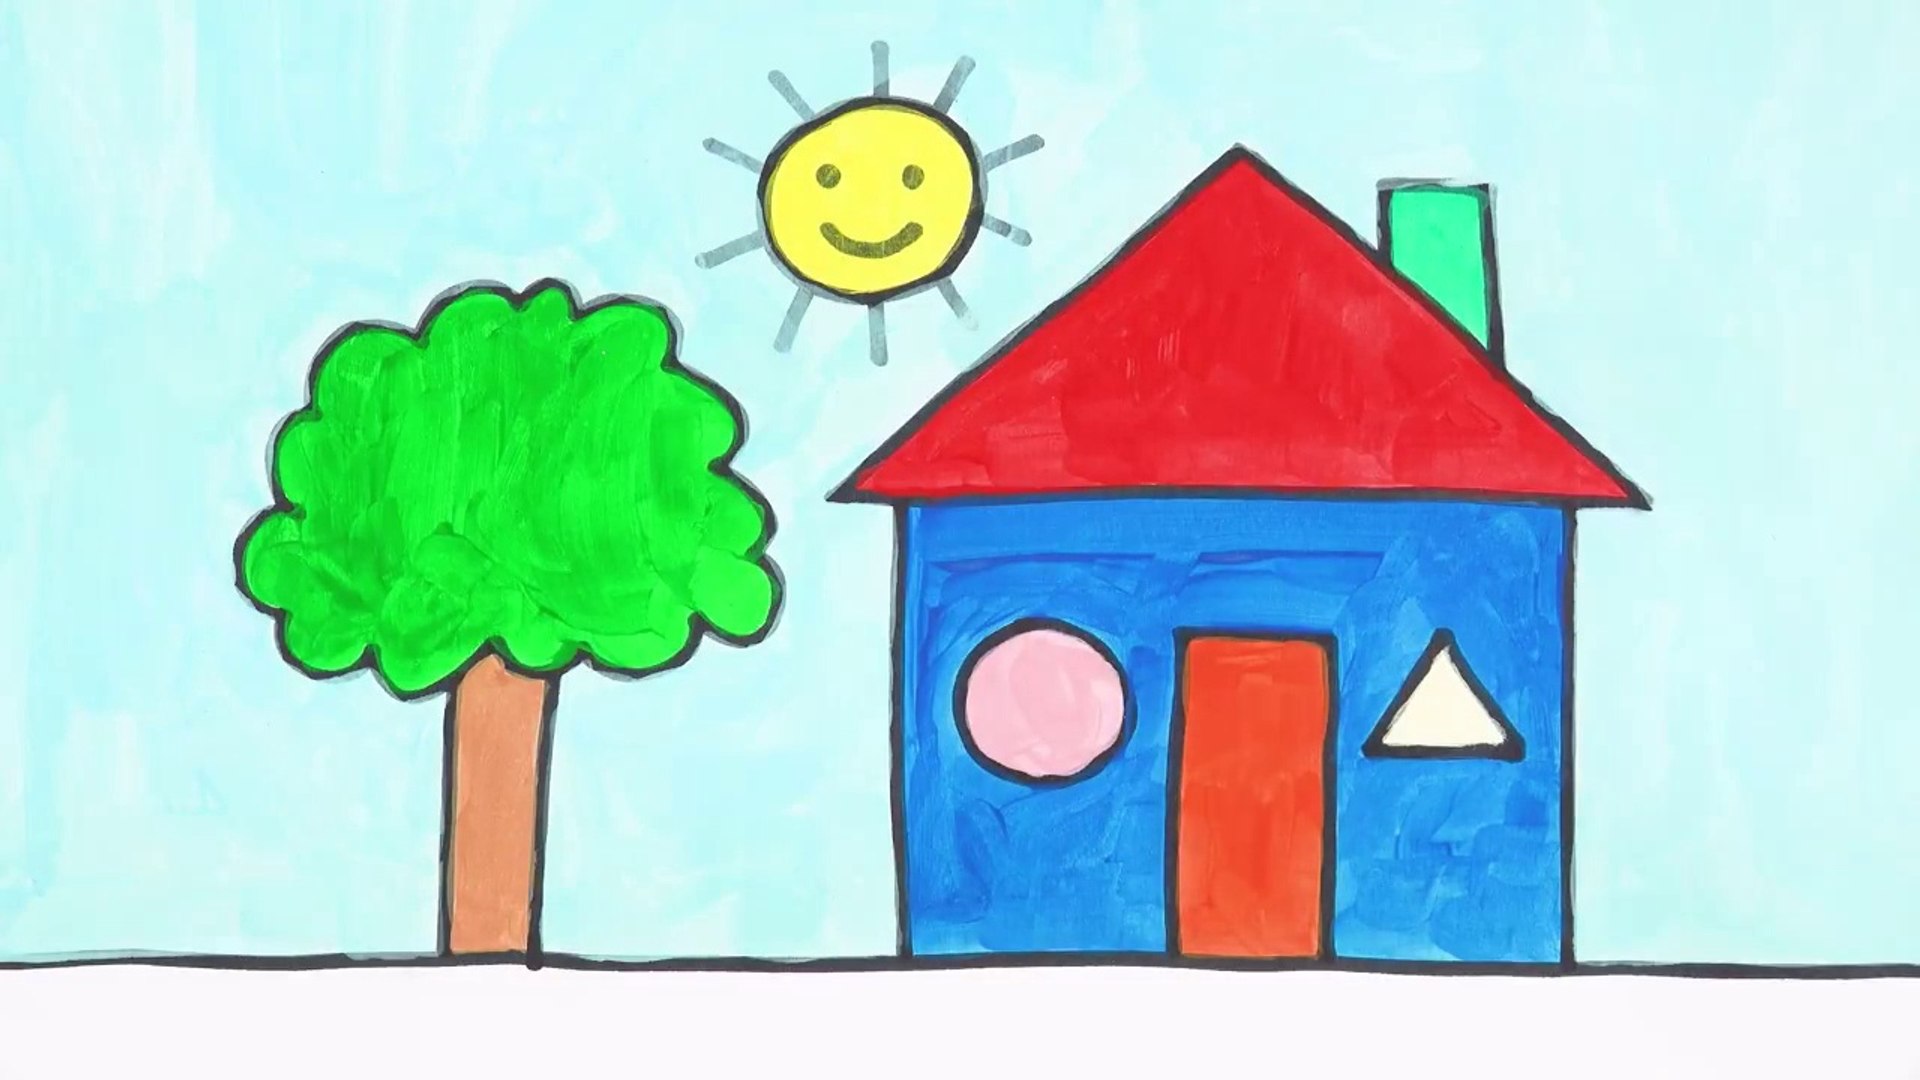 Drawing House form Shapes, easy acrylic painting for kids - Art